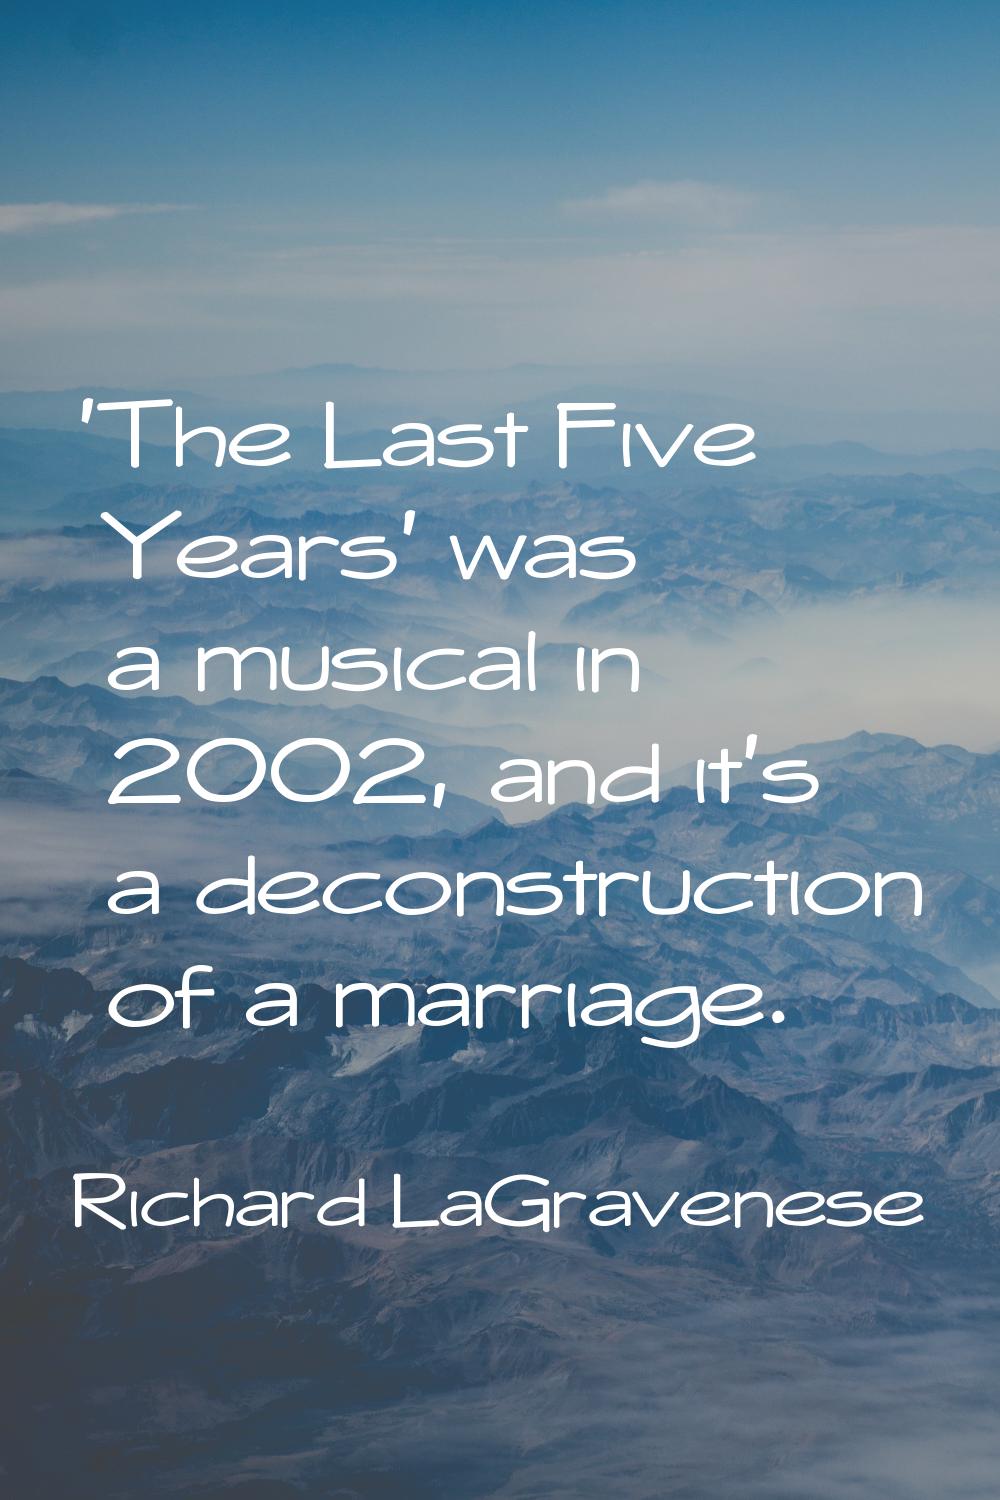 'The Last Five Years' was a musical in 2002, and it's a deconstruction of a marriage.